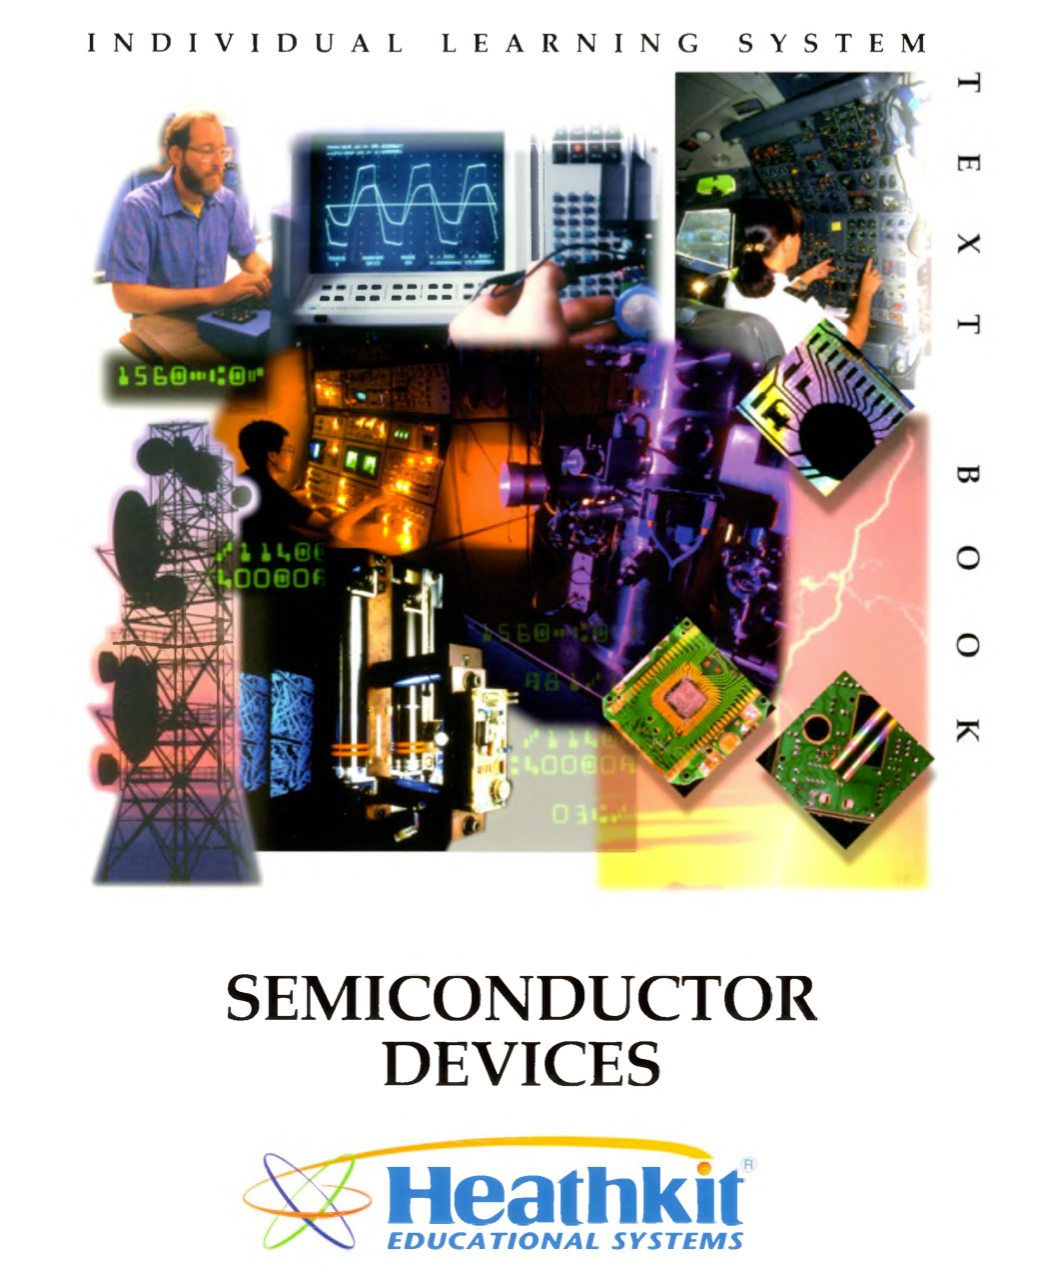 Heathkit EE-3103-B - Semiconductor Devices Individual Learning Text Book (1999)